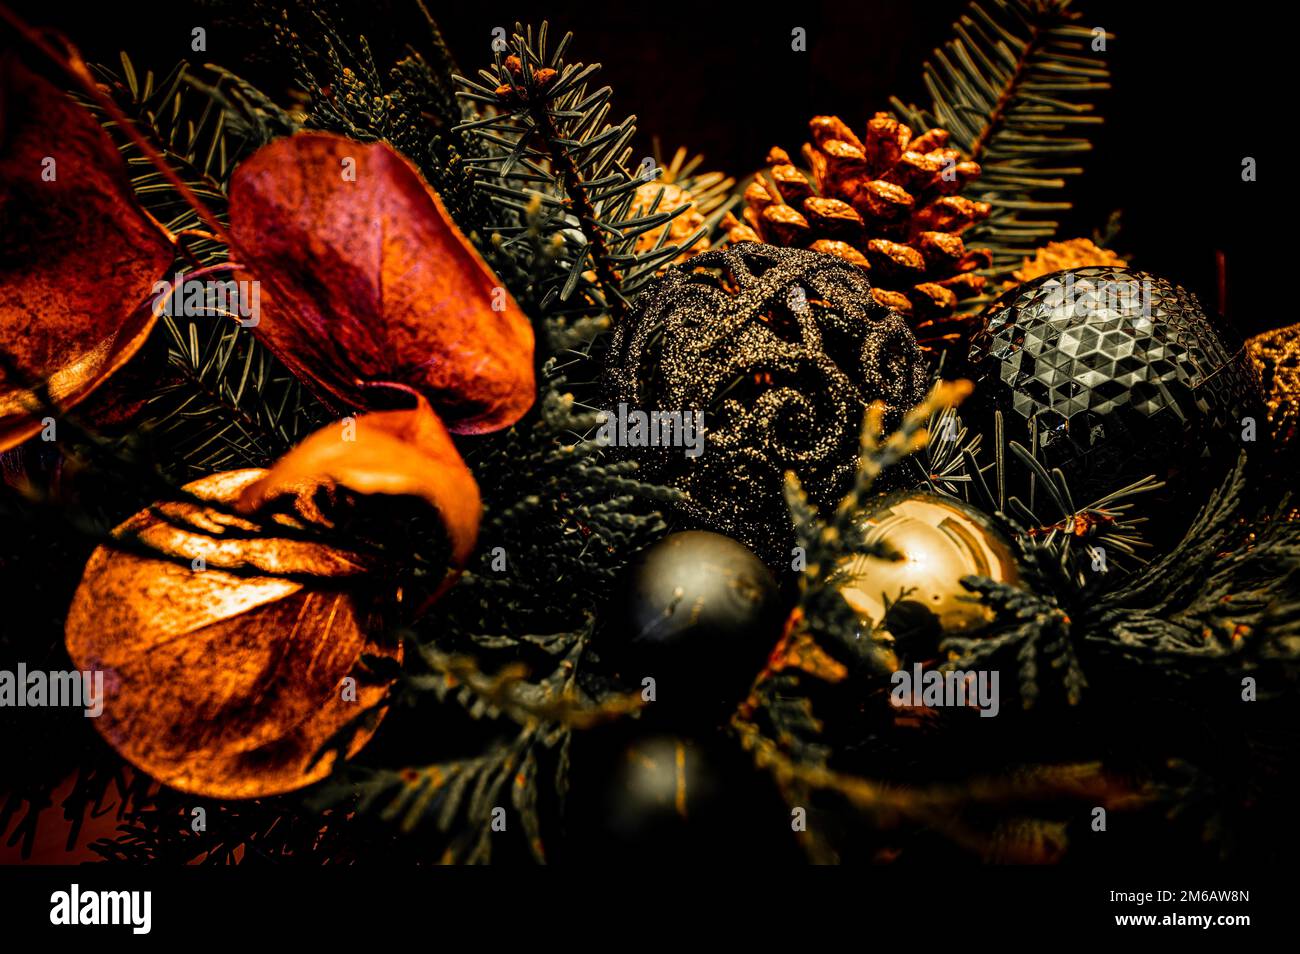 Christmas bouquet of spruce (Picea), pine (Pinus) and Nordmann fir (Abies nordmanniana) branches with golden pine cones (pinea), green and golden Stock Photo